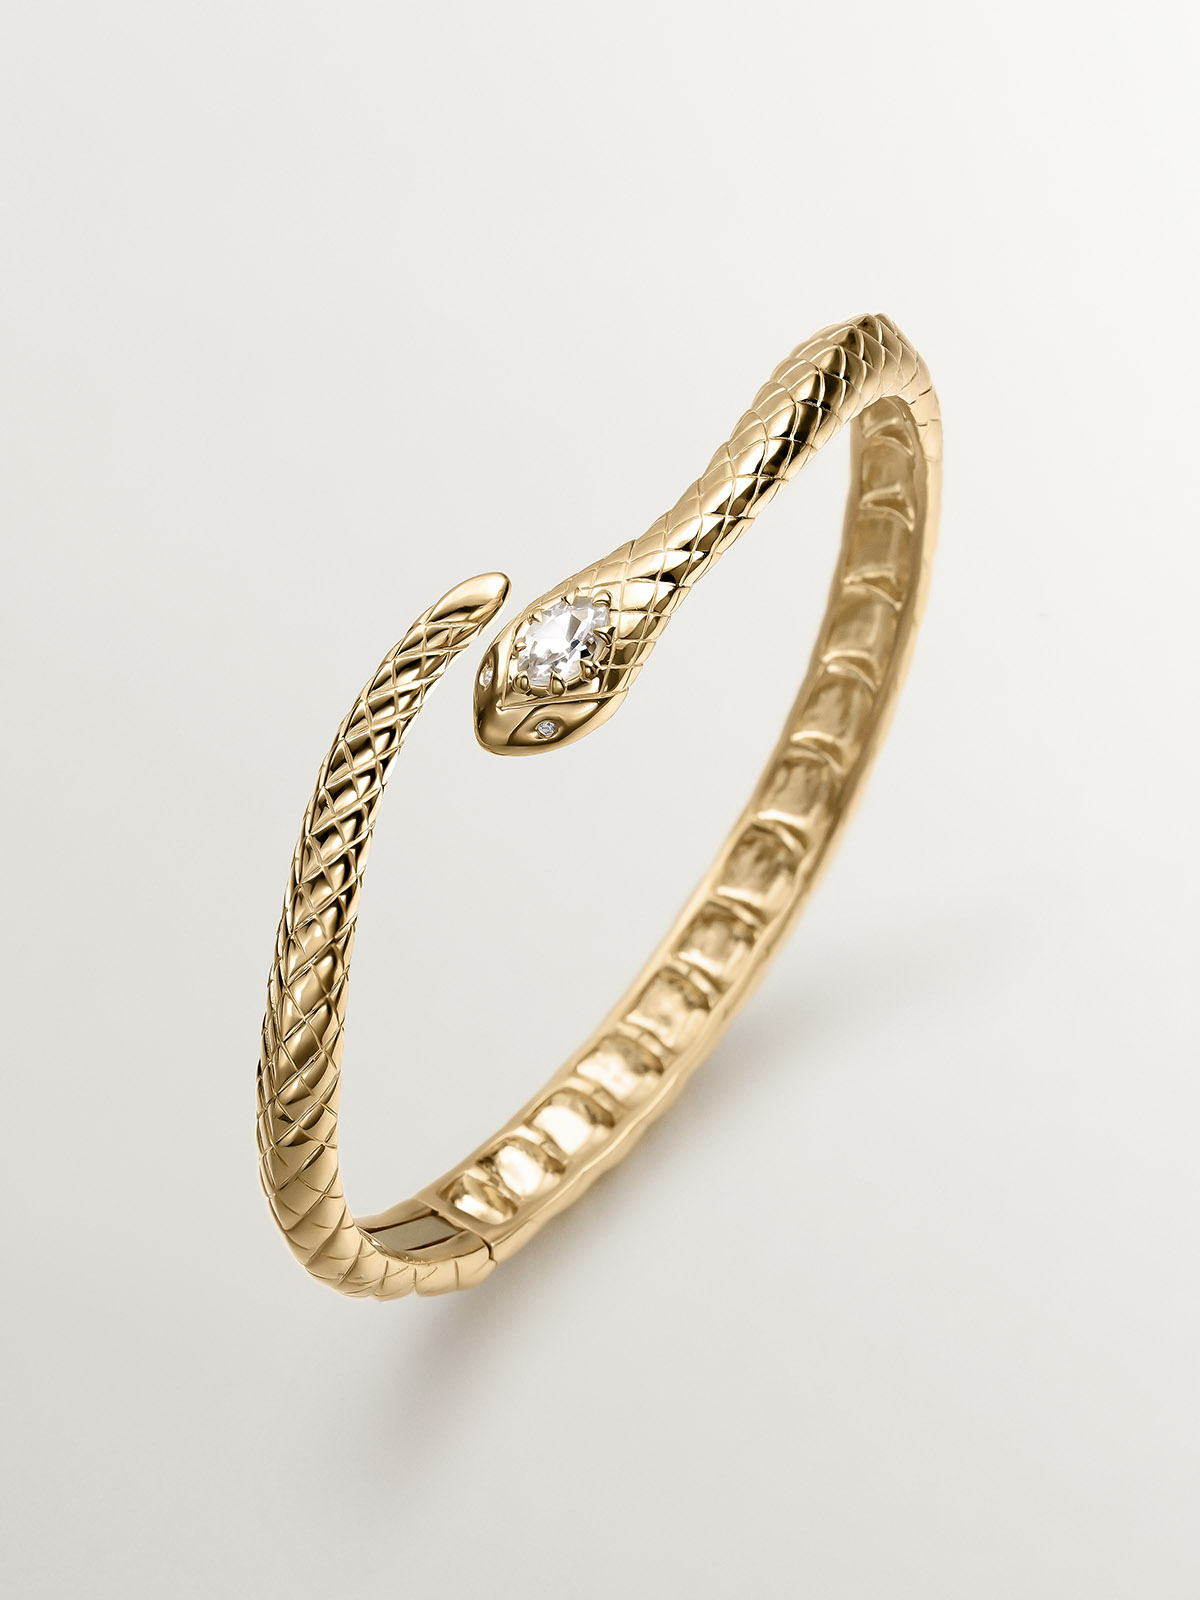 925 Silver bracelet bathed in 18K yellow gold with a snake shape, topazes and white sapphires.